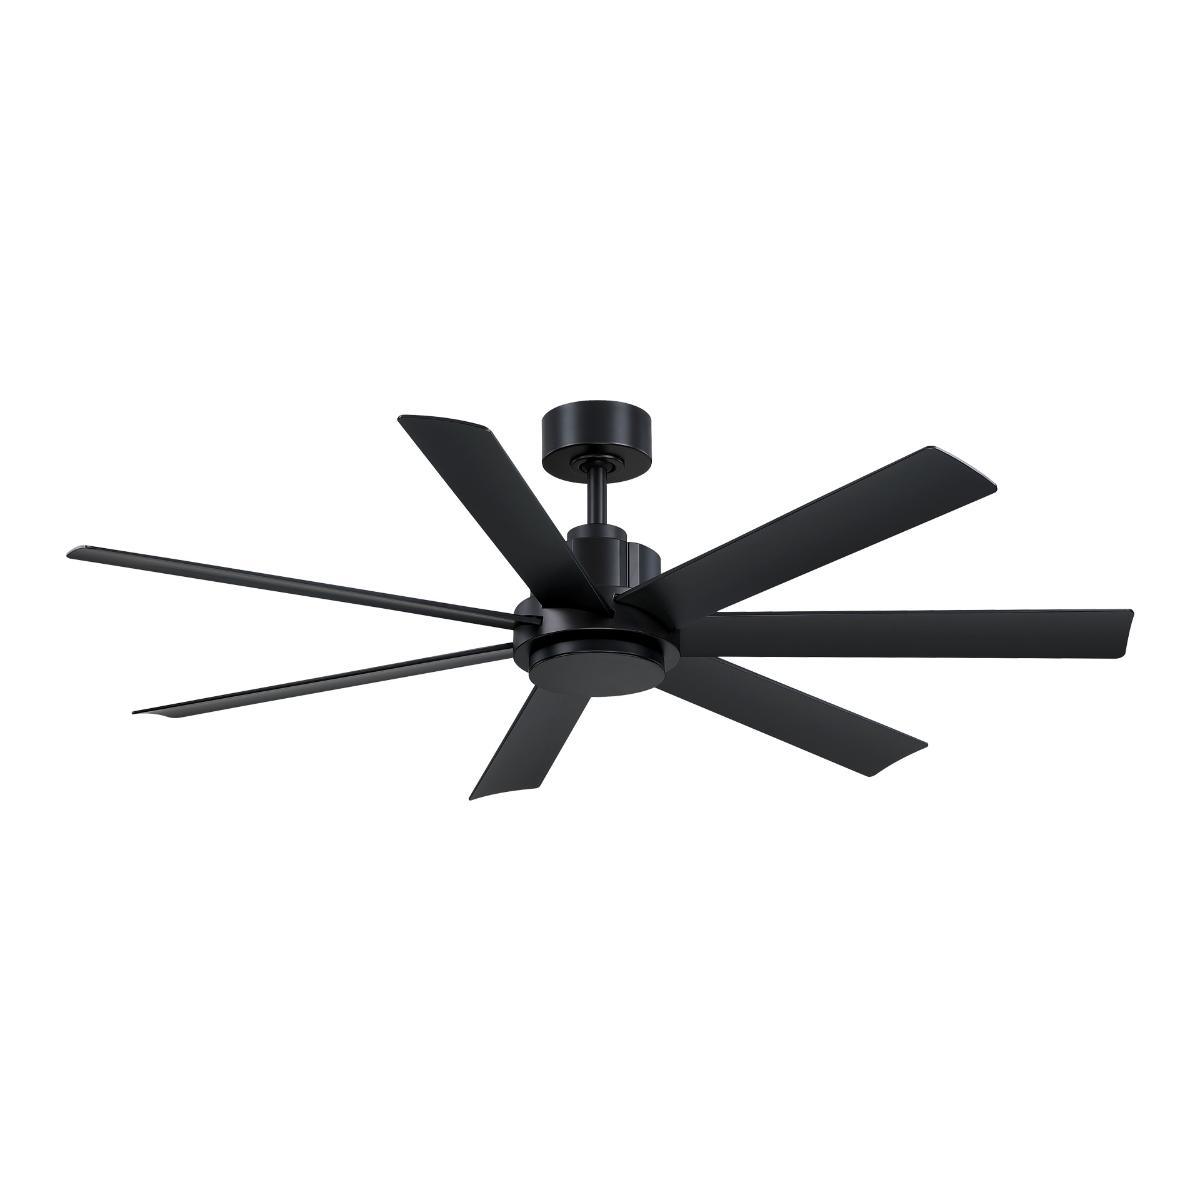 Pendry 56 inch Indoor/Outdoor Ceiling Fan with Remote, Black Finish - Bees Lighting